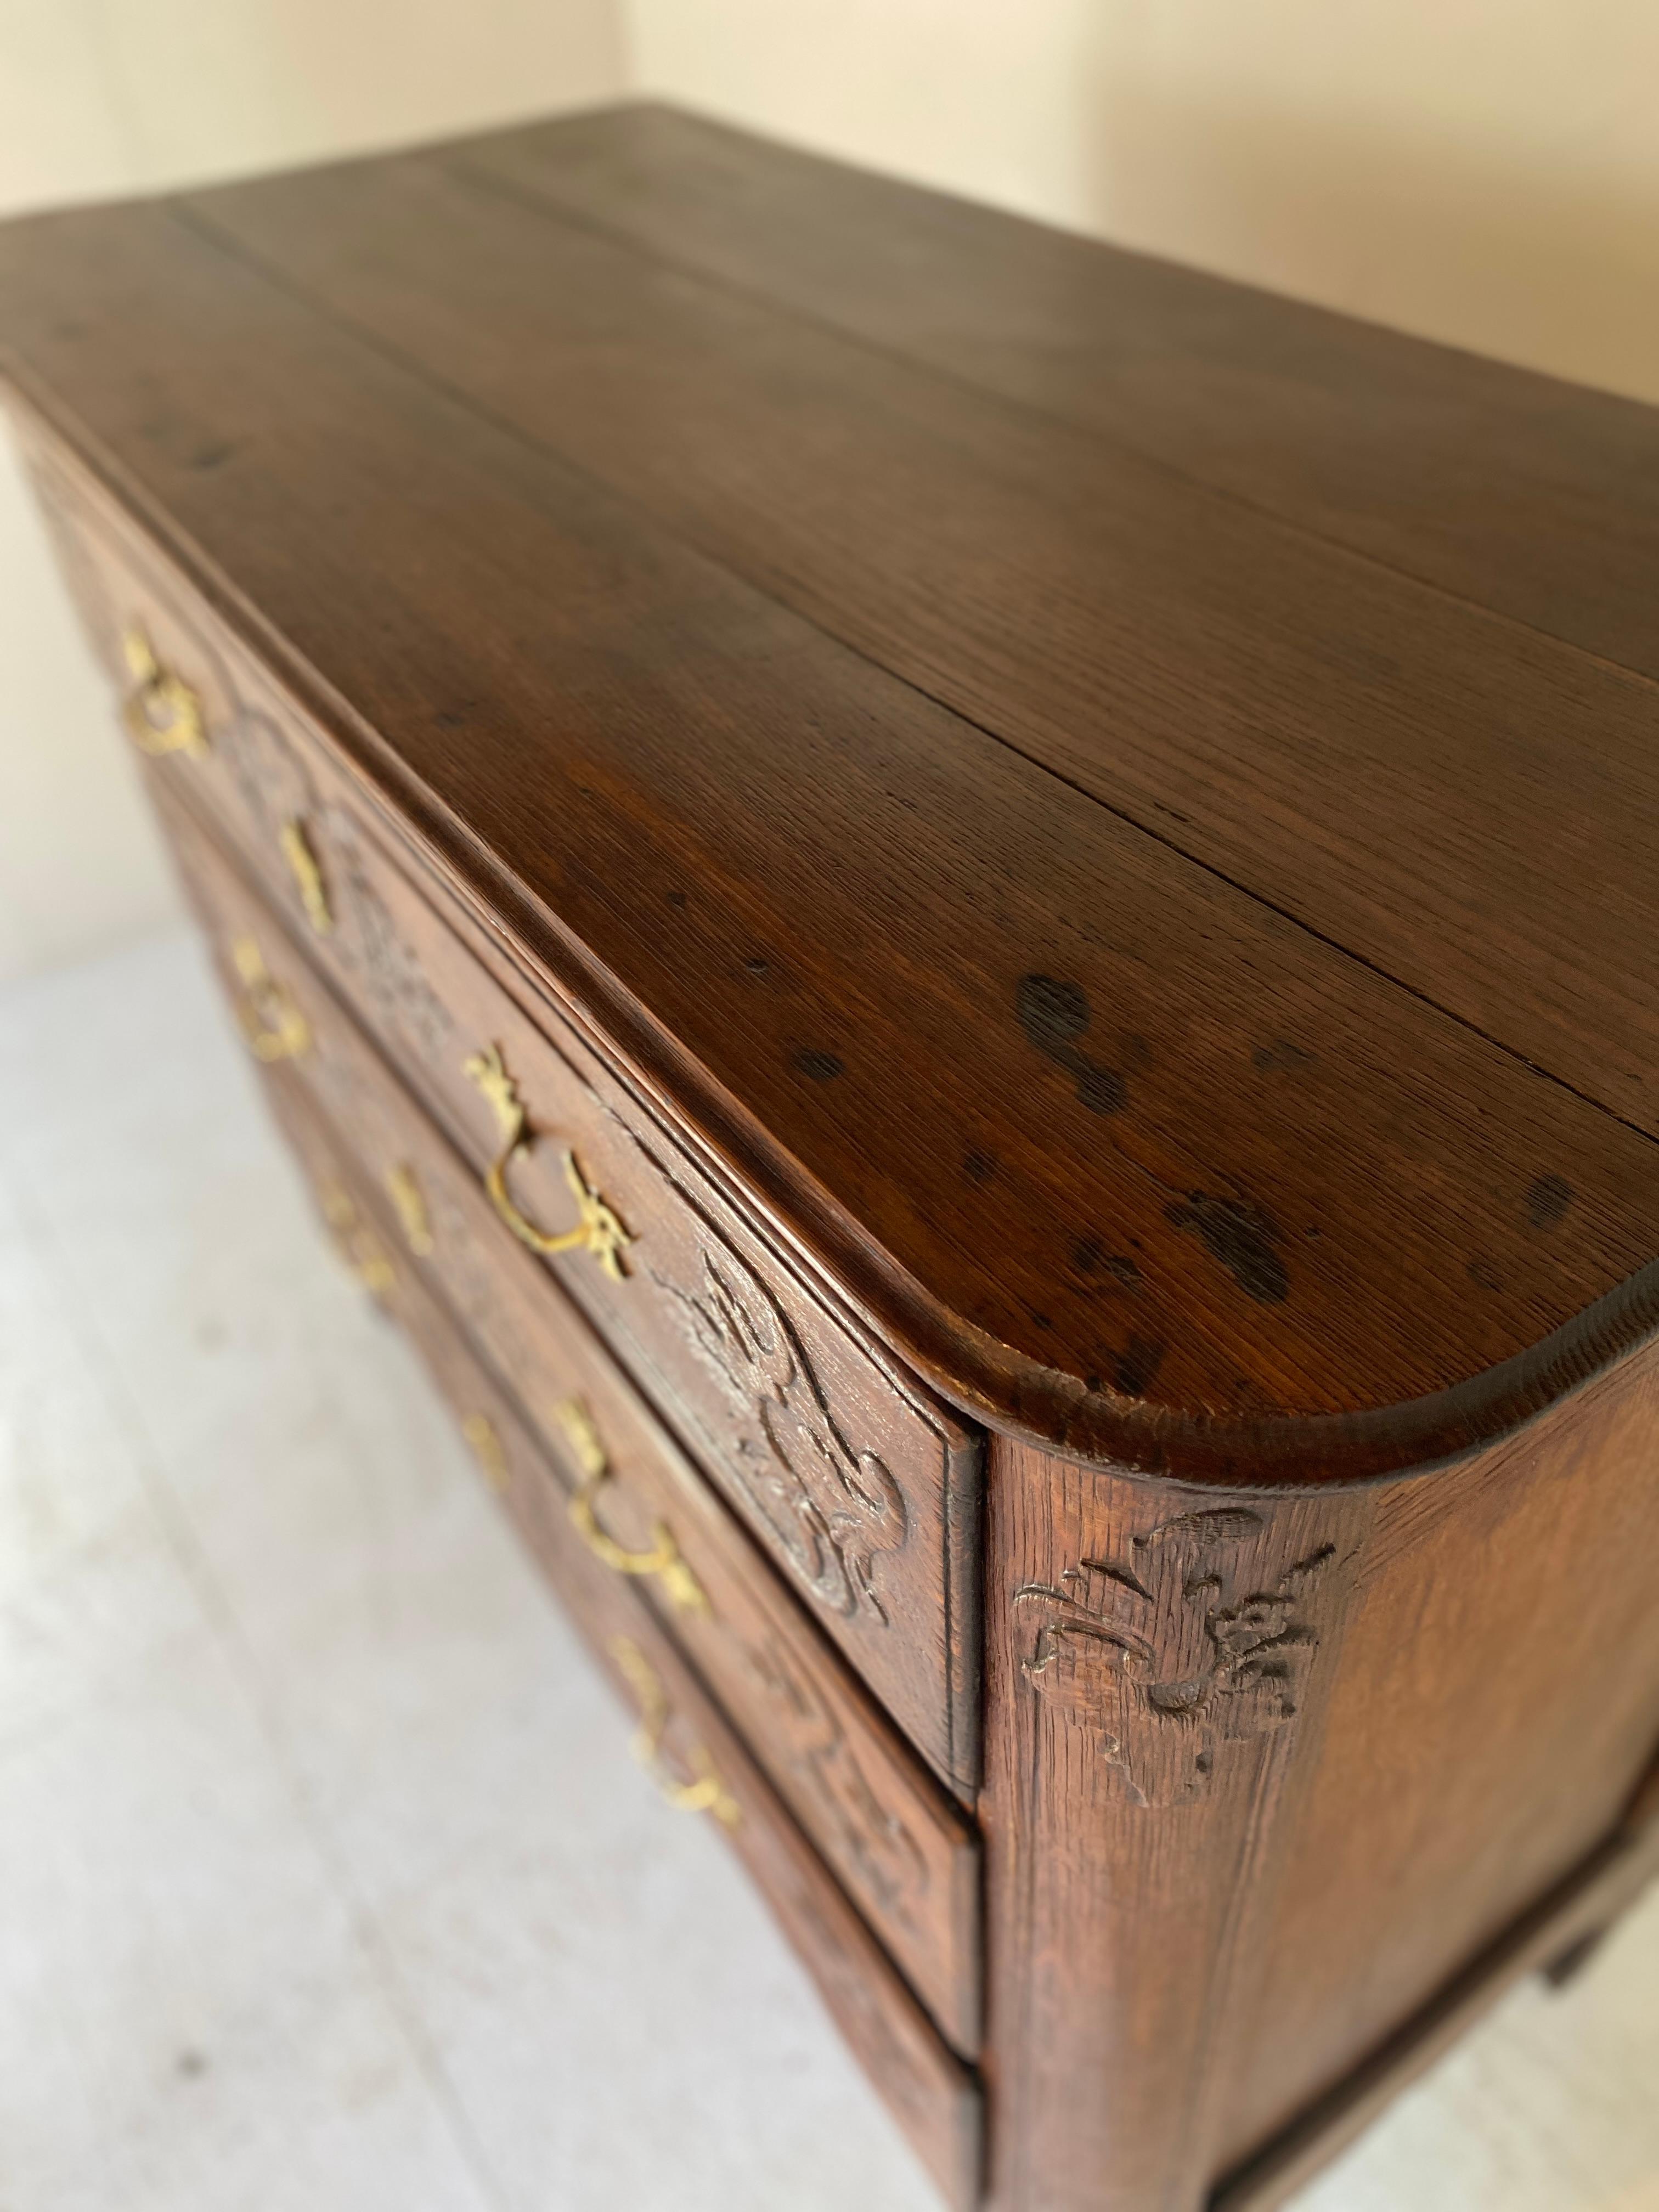 Oak chest of drawers louis xv late 18th century liegeoose in oak For Sale